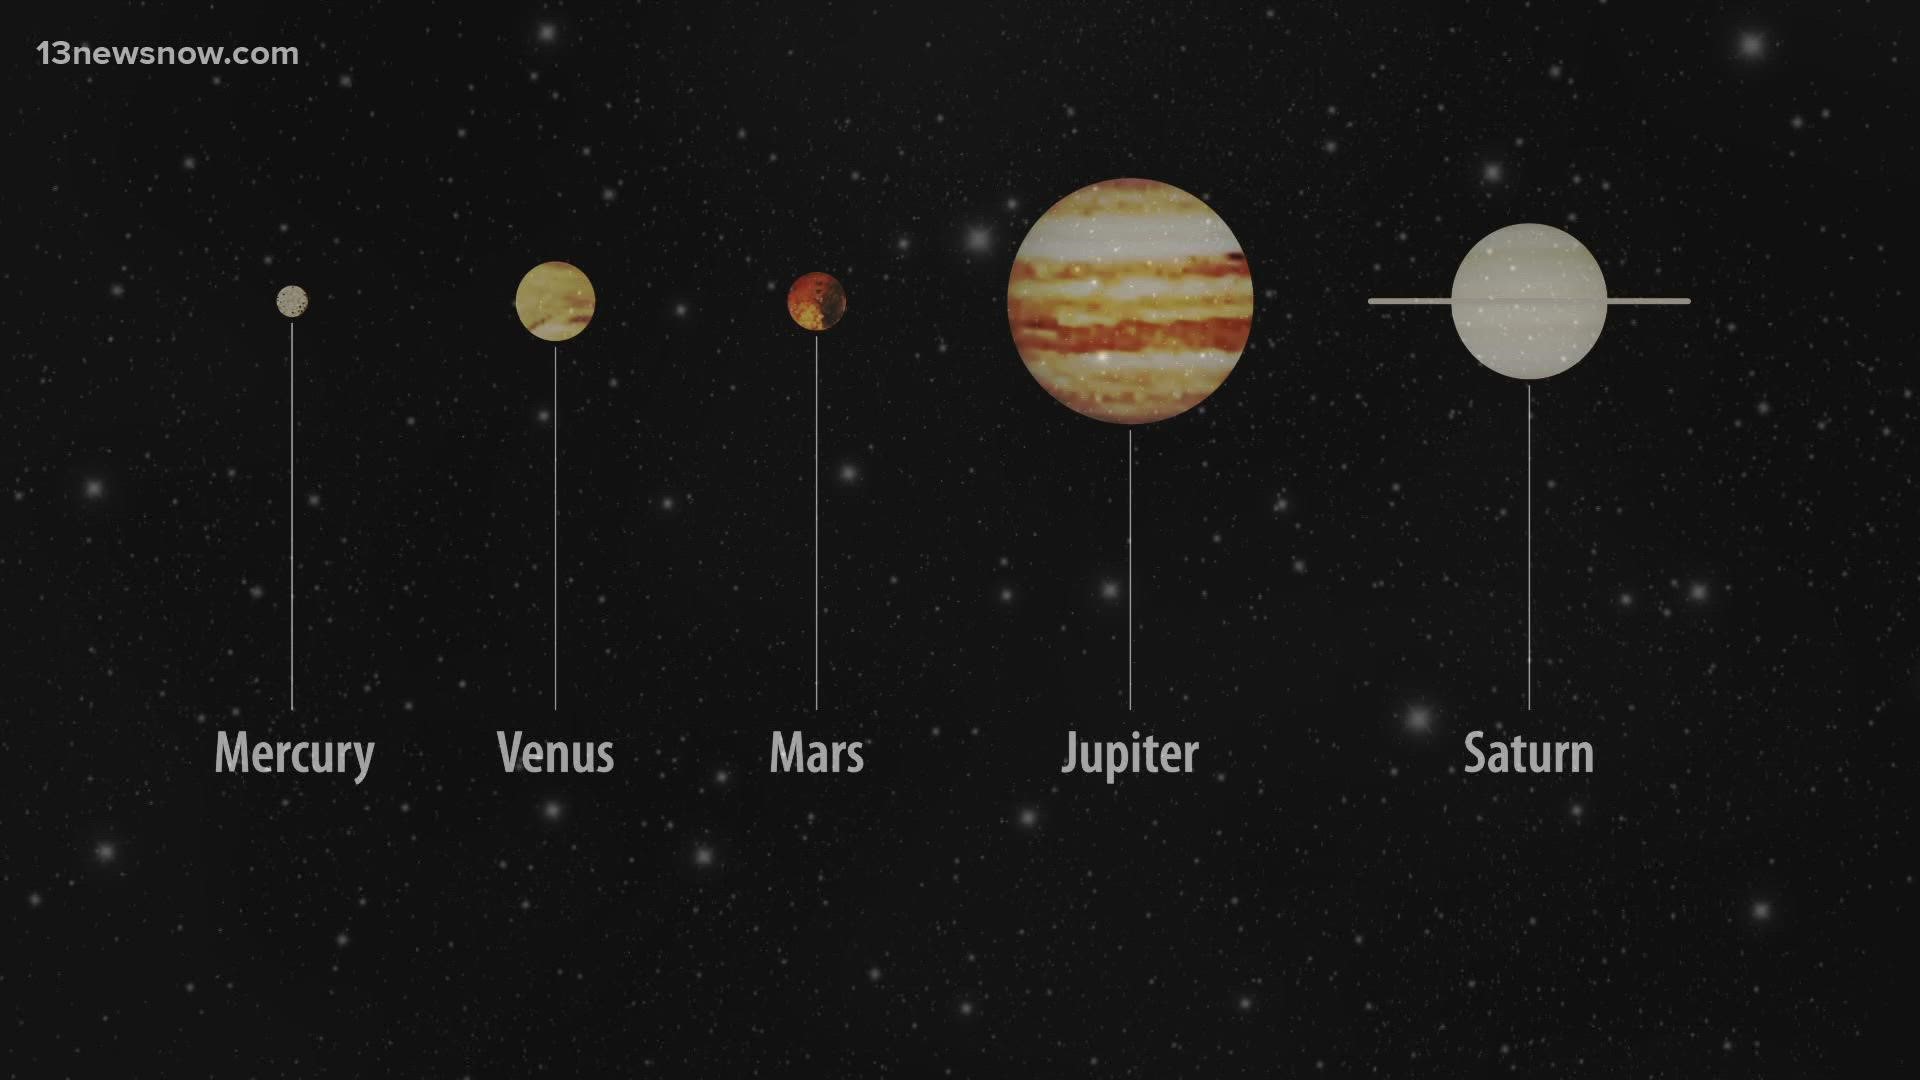 About an hour before sunrise, people can look up at the sky and see five planets aligned with each other.